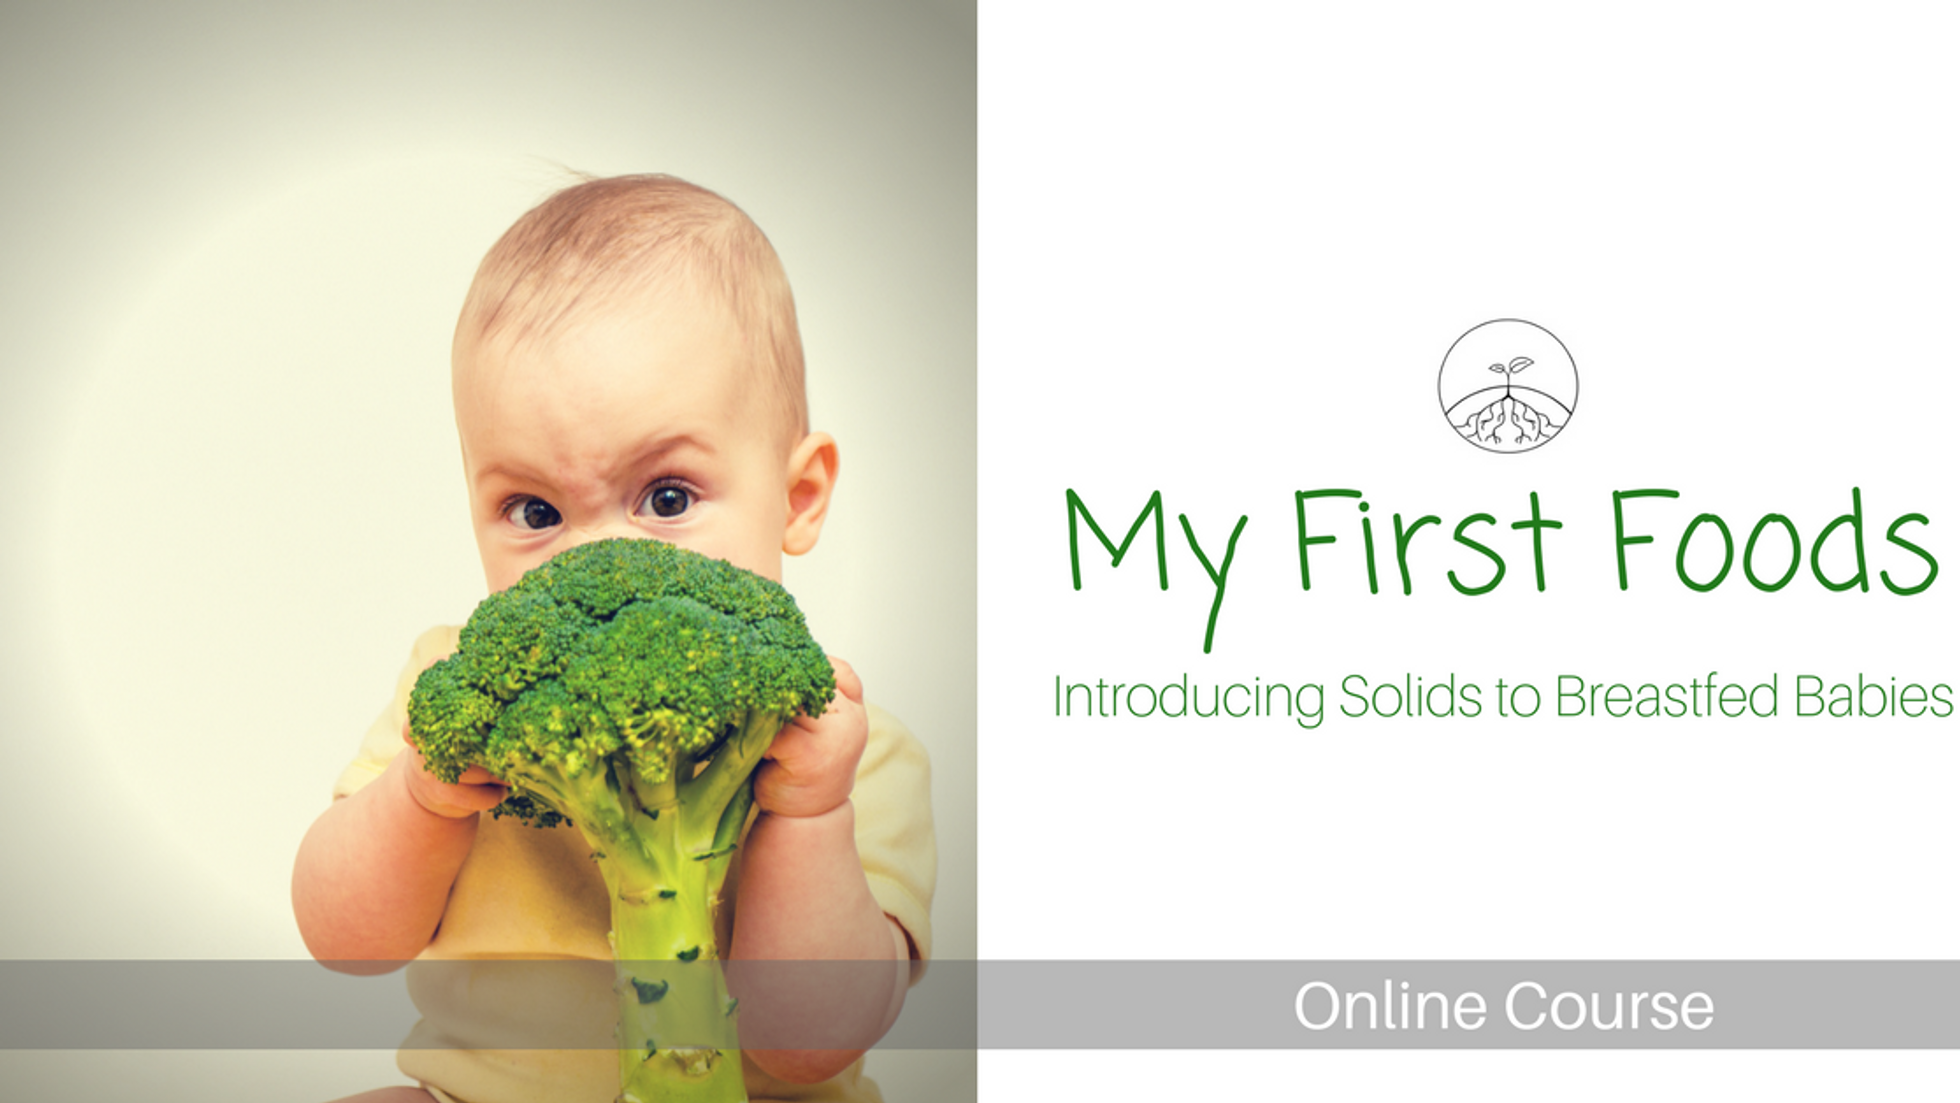 My First Foods - Introducing Solid Foods to Breastfed Babies